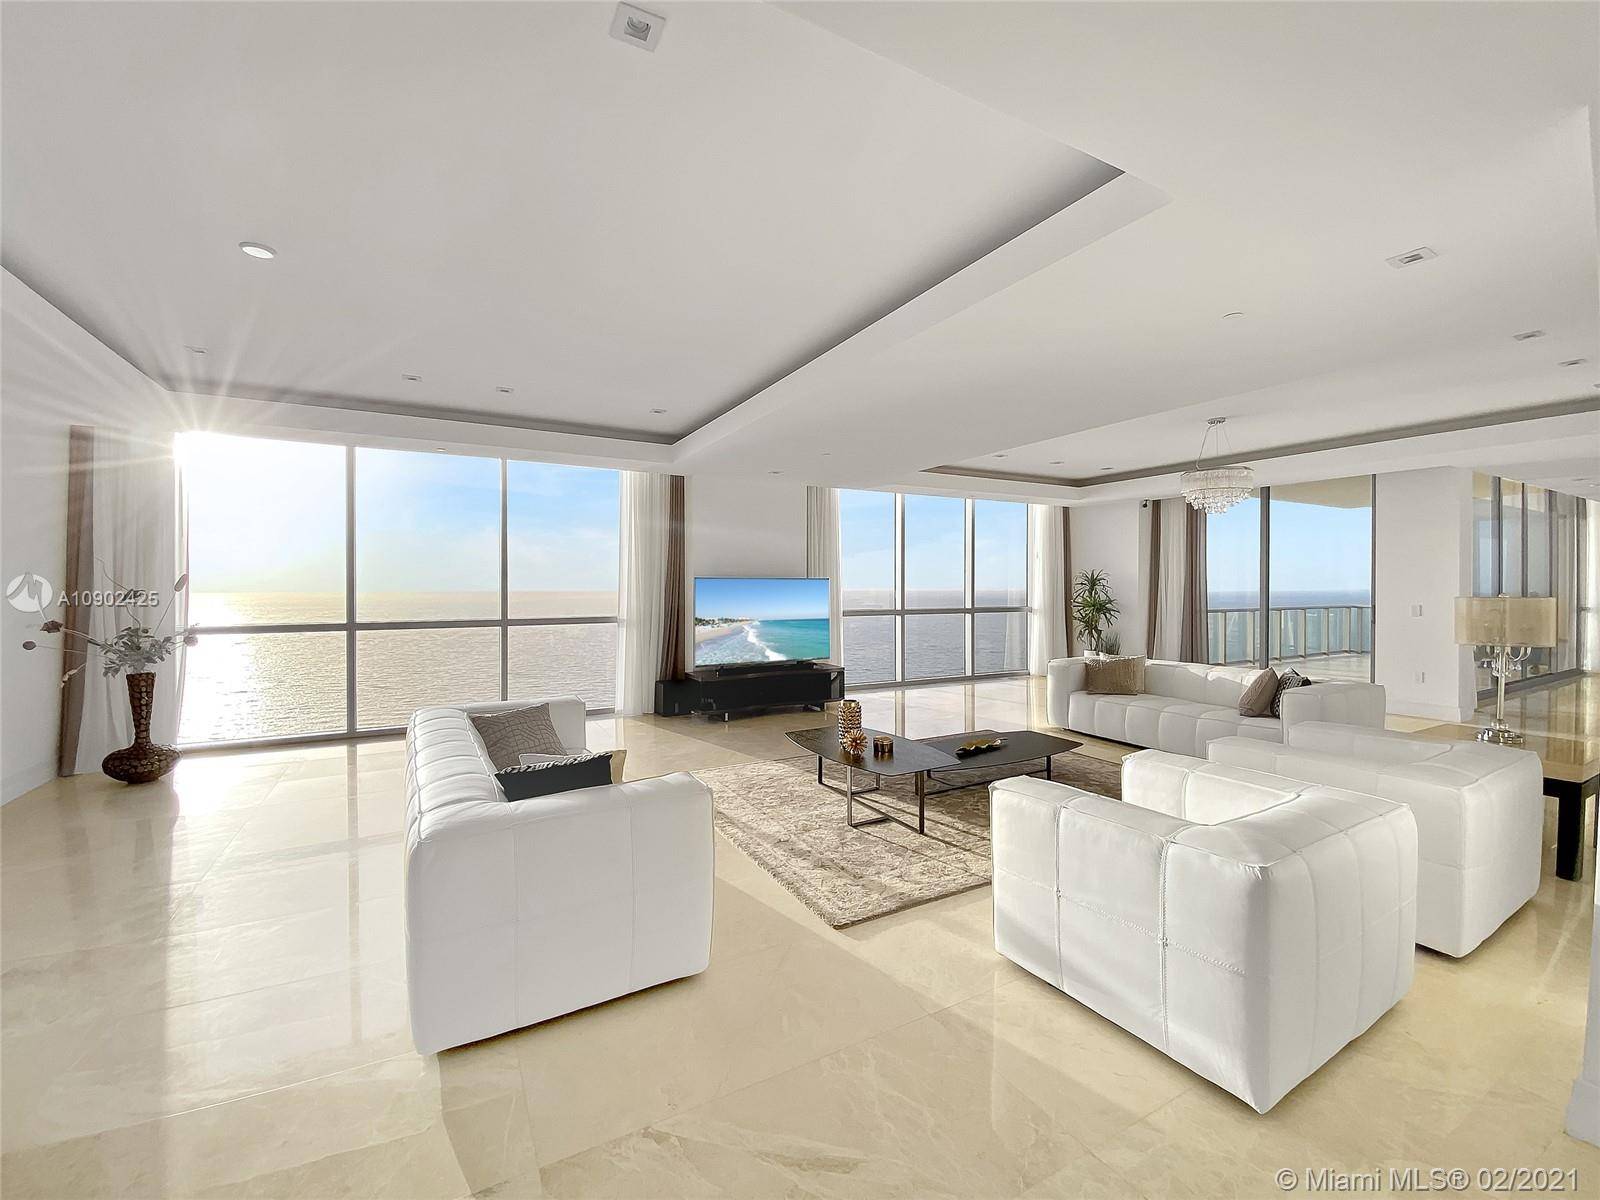 Live the 5 star luxury resort lifestyle from the entire full floor Tower Suite at the very exclusive and private Mansions at Aqualina in Sunny Isles, Florida.